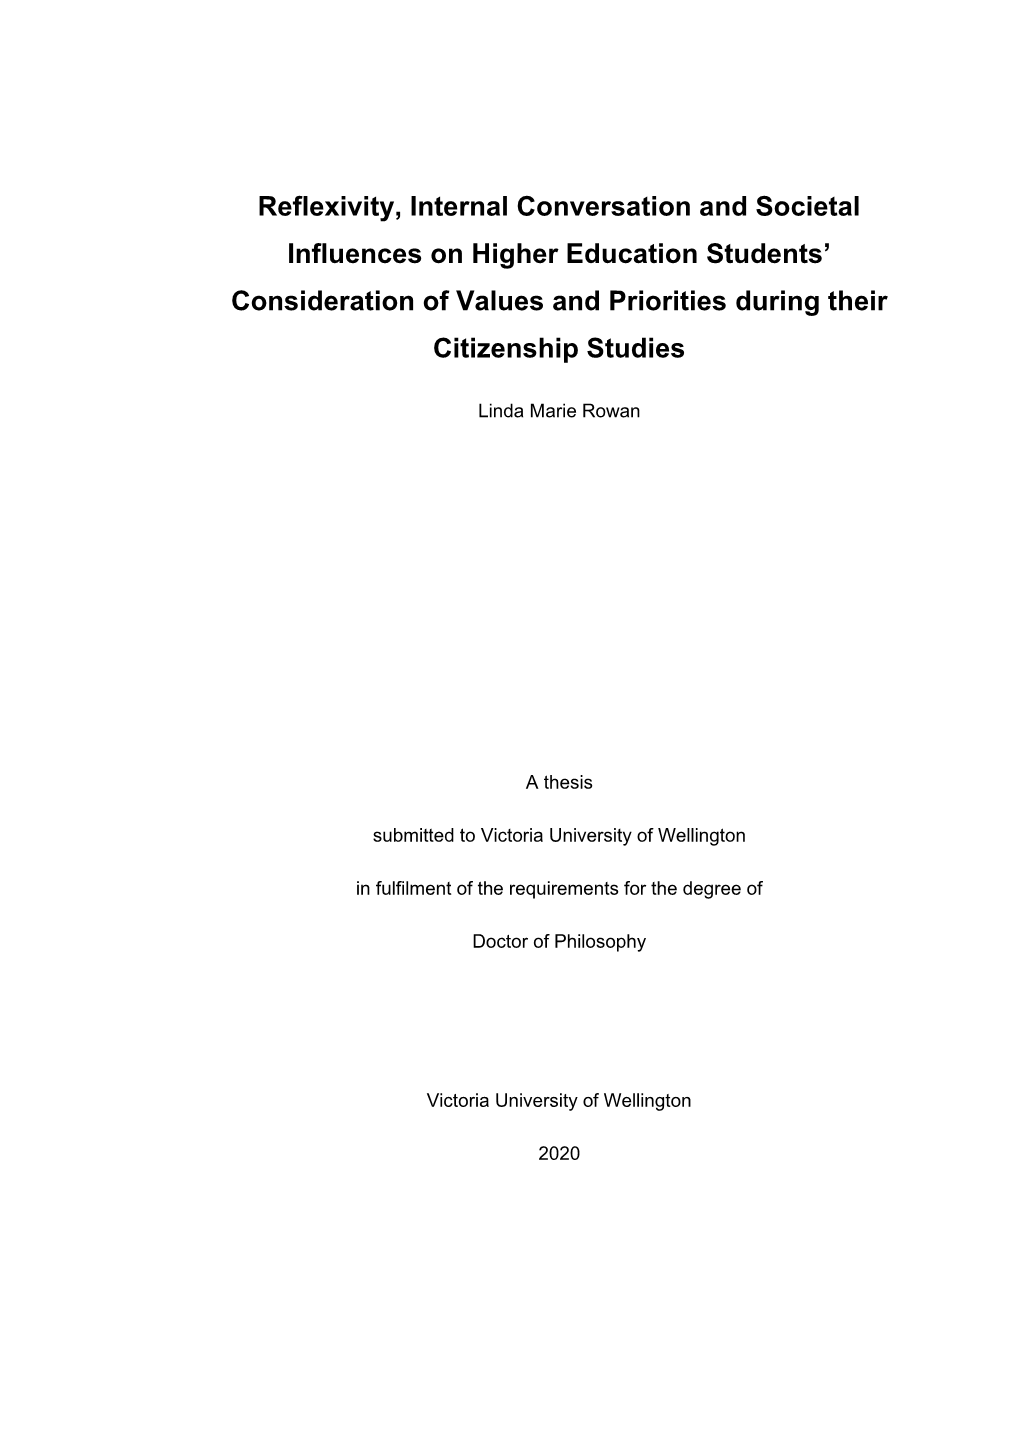 Reflexivity, Internal Conversation and Societal Influences on Higher Education Students’ Consideration of Values and Priorities During Their Citizenship Studies